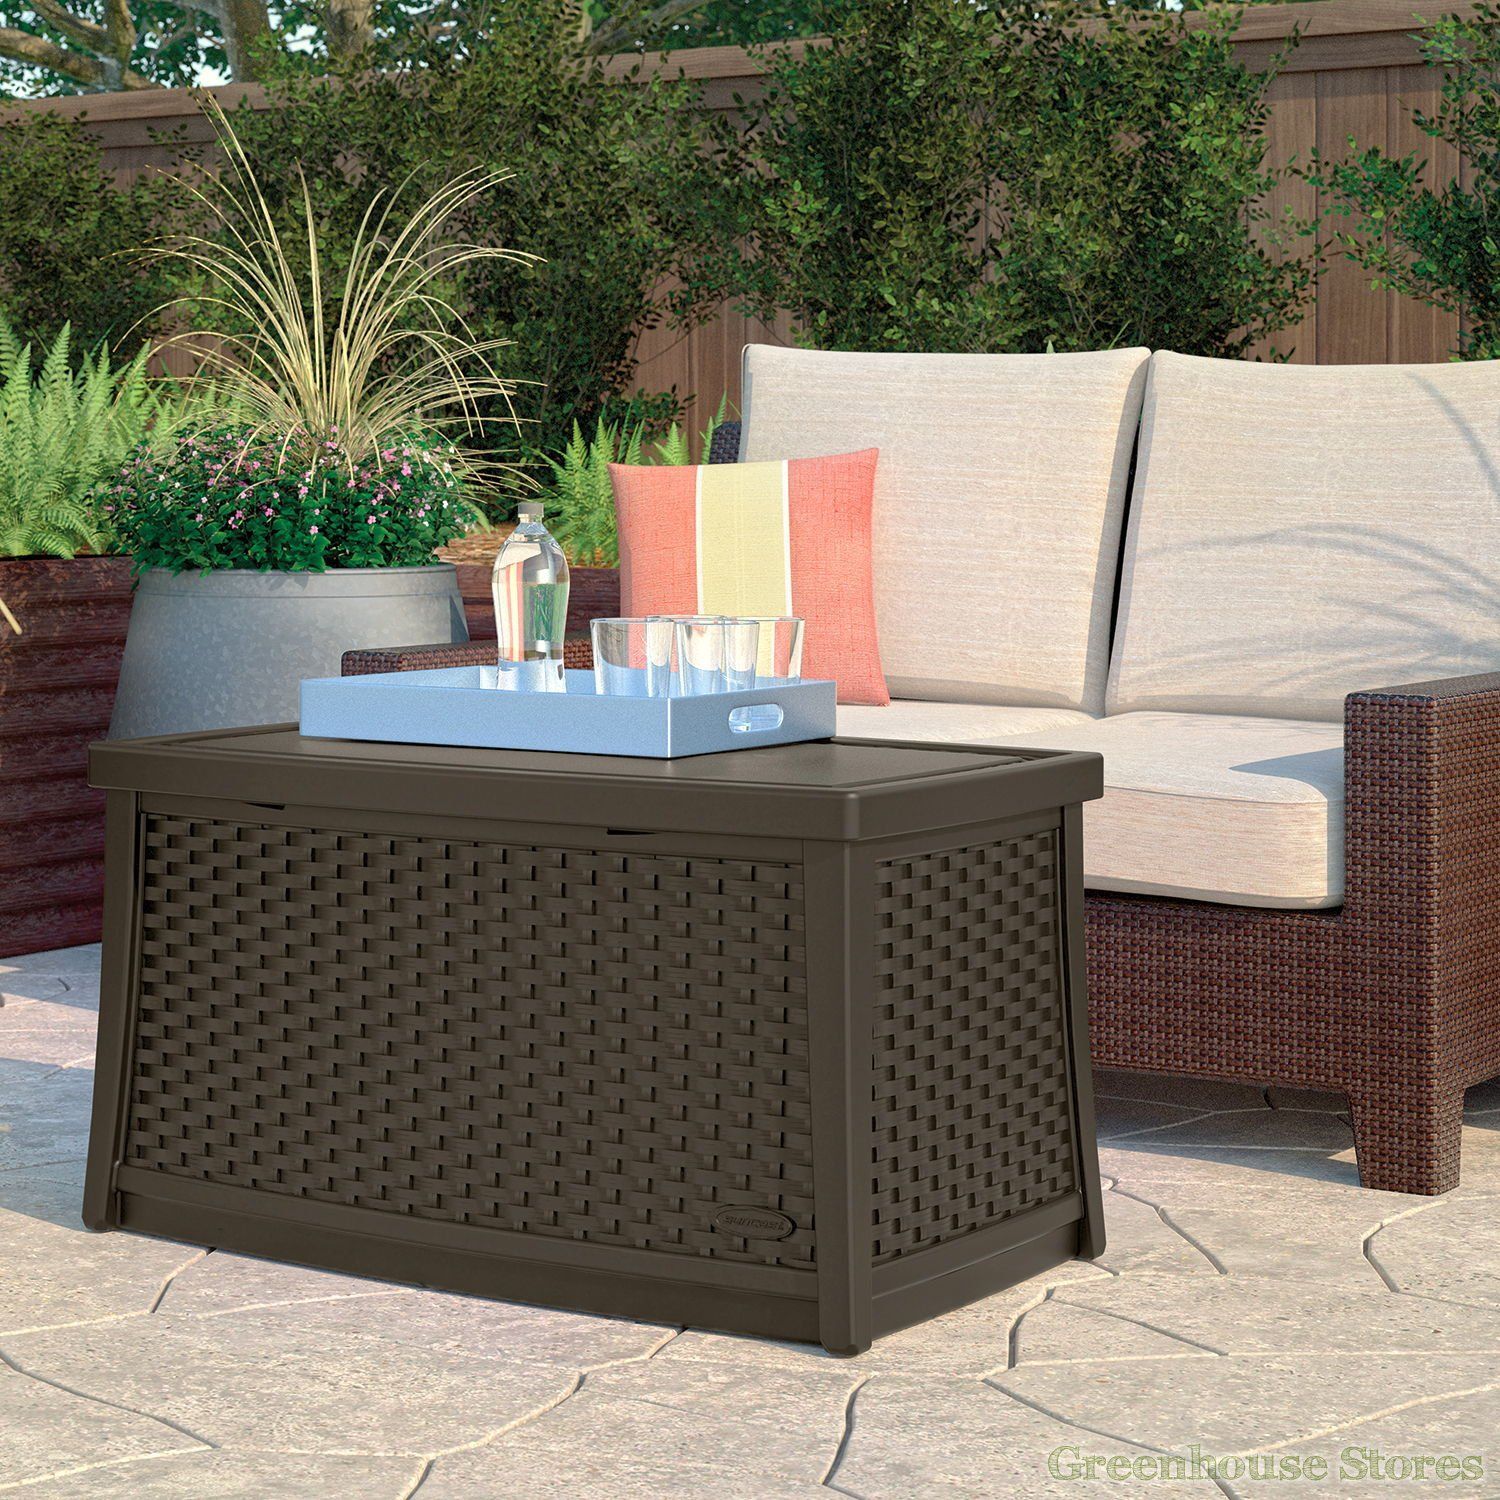 Suncast Coffee Table With Storage Box | Outdoor Coffee Tables, Coffee Inside Outdoor Coffee Tables With Storage (View 9 of 15)